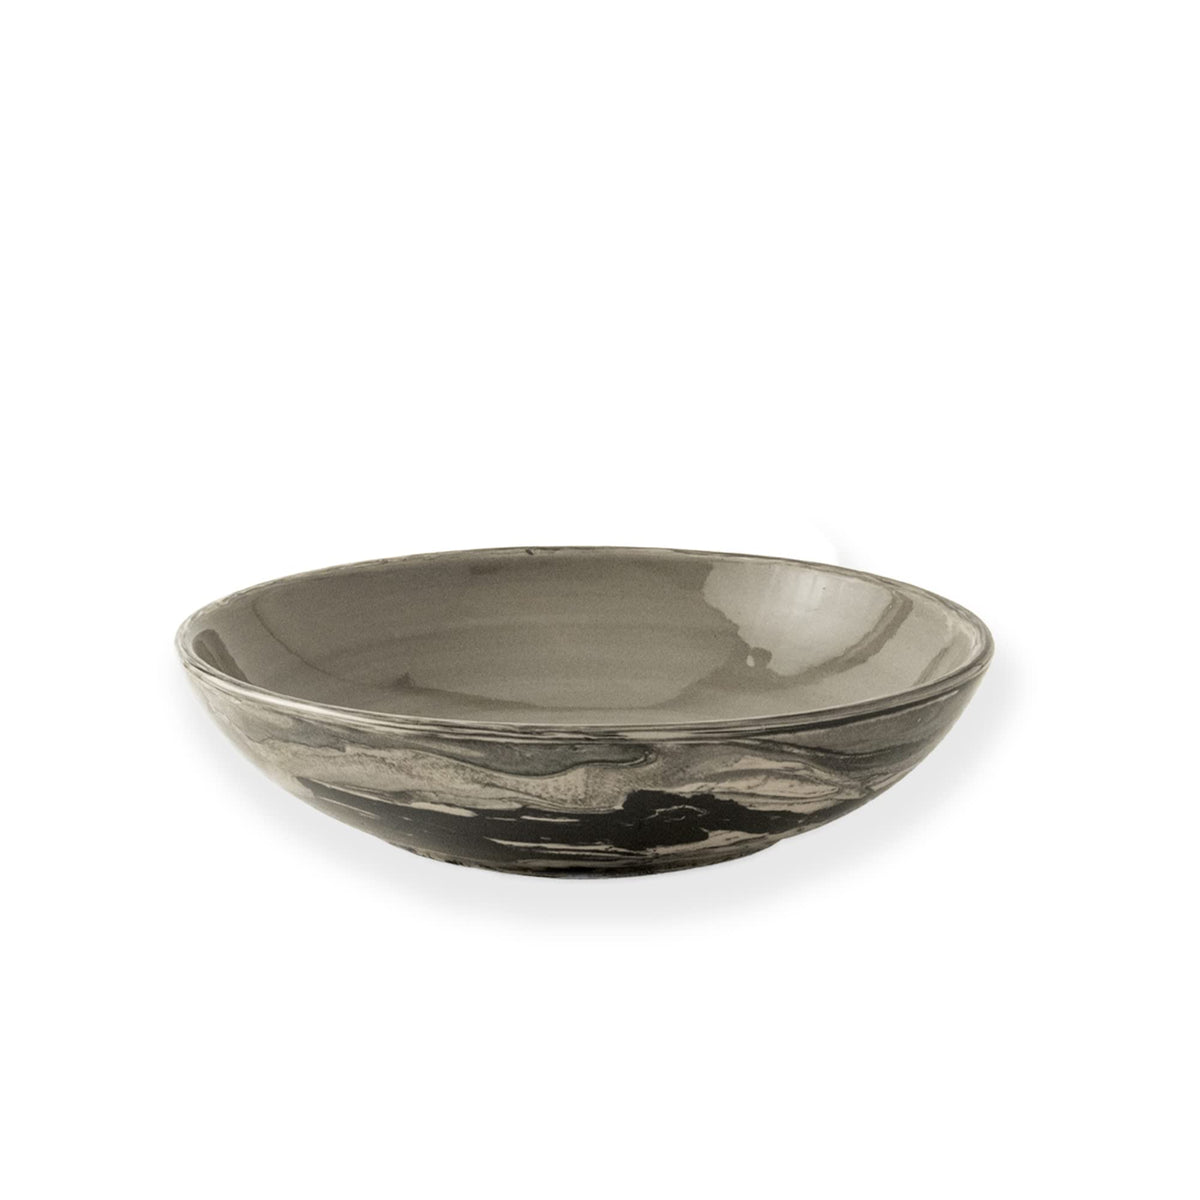 Carbon Ceramic Pasta Bowl| Colour: Black| Ceramic | Hand marbling | 400 ML | Handcrafted | Sustainable | Food Safe | Gifting | Form and function |